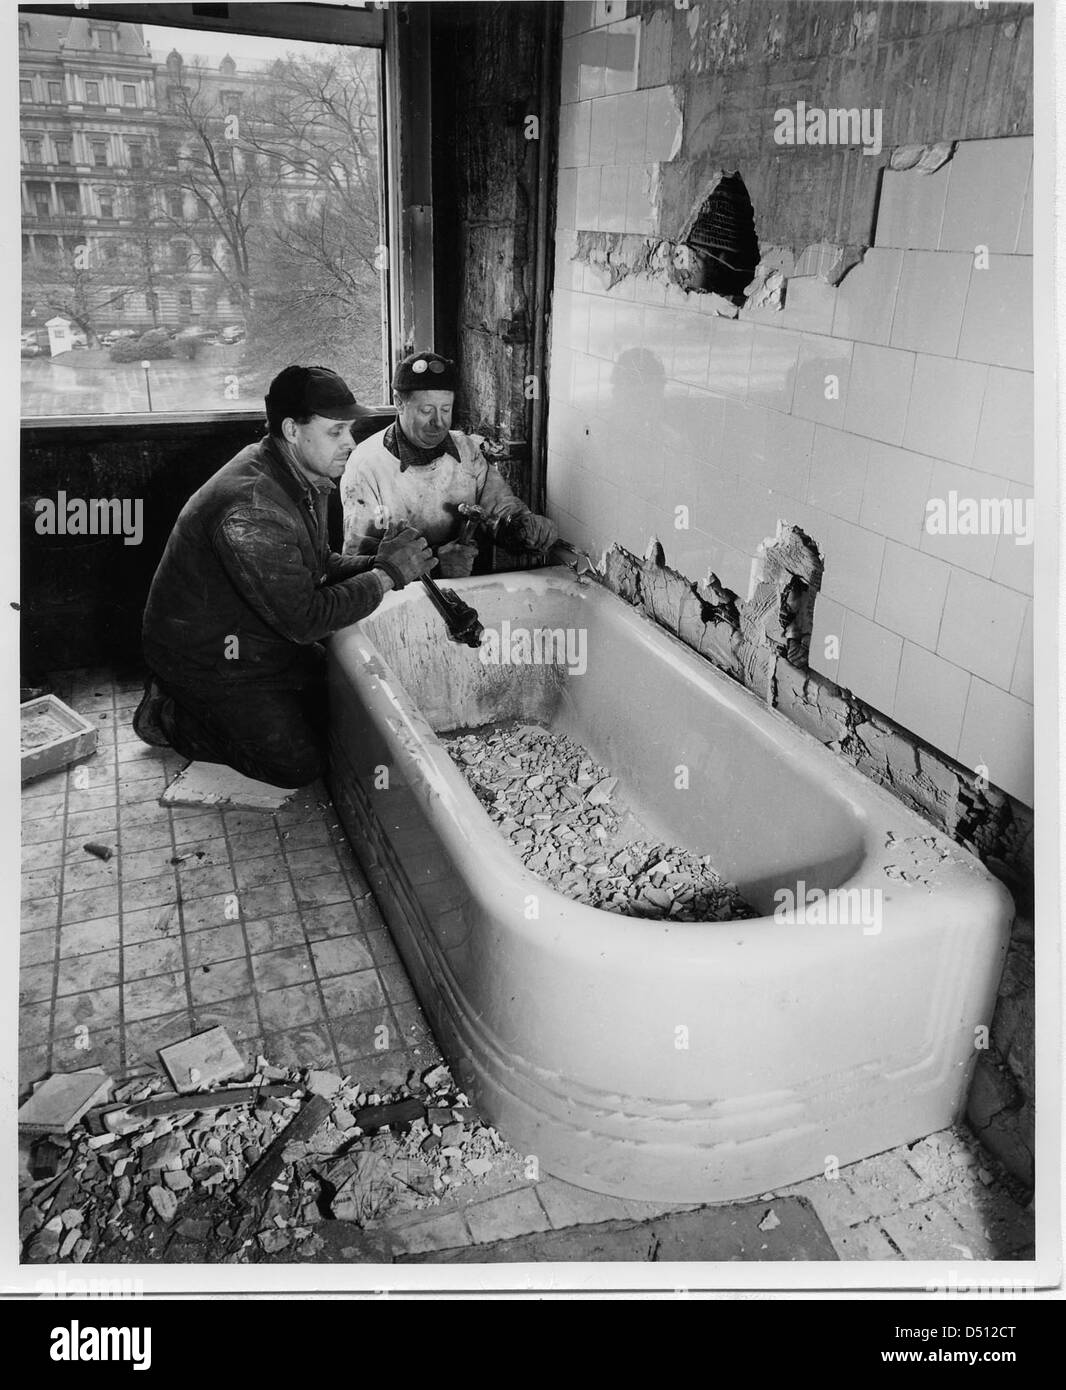 Dismantling a Bathtub in the White House, 02/10/1950 Stock Photo